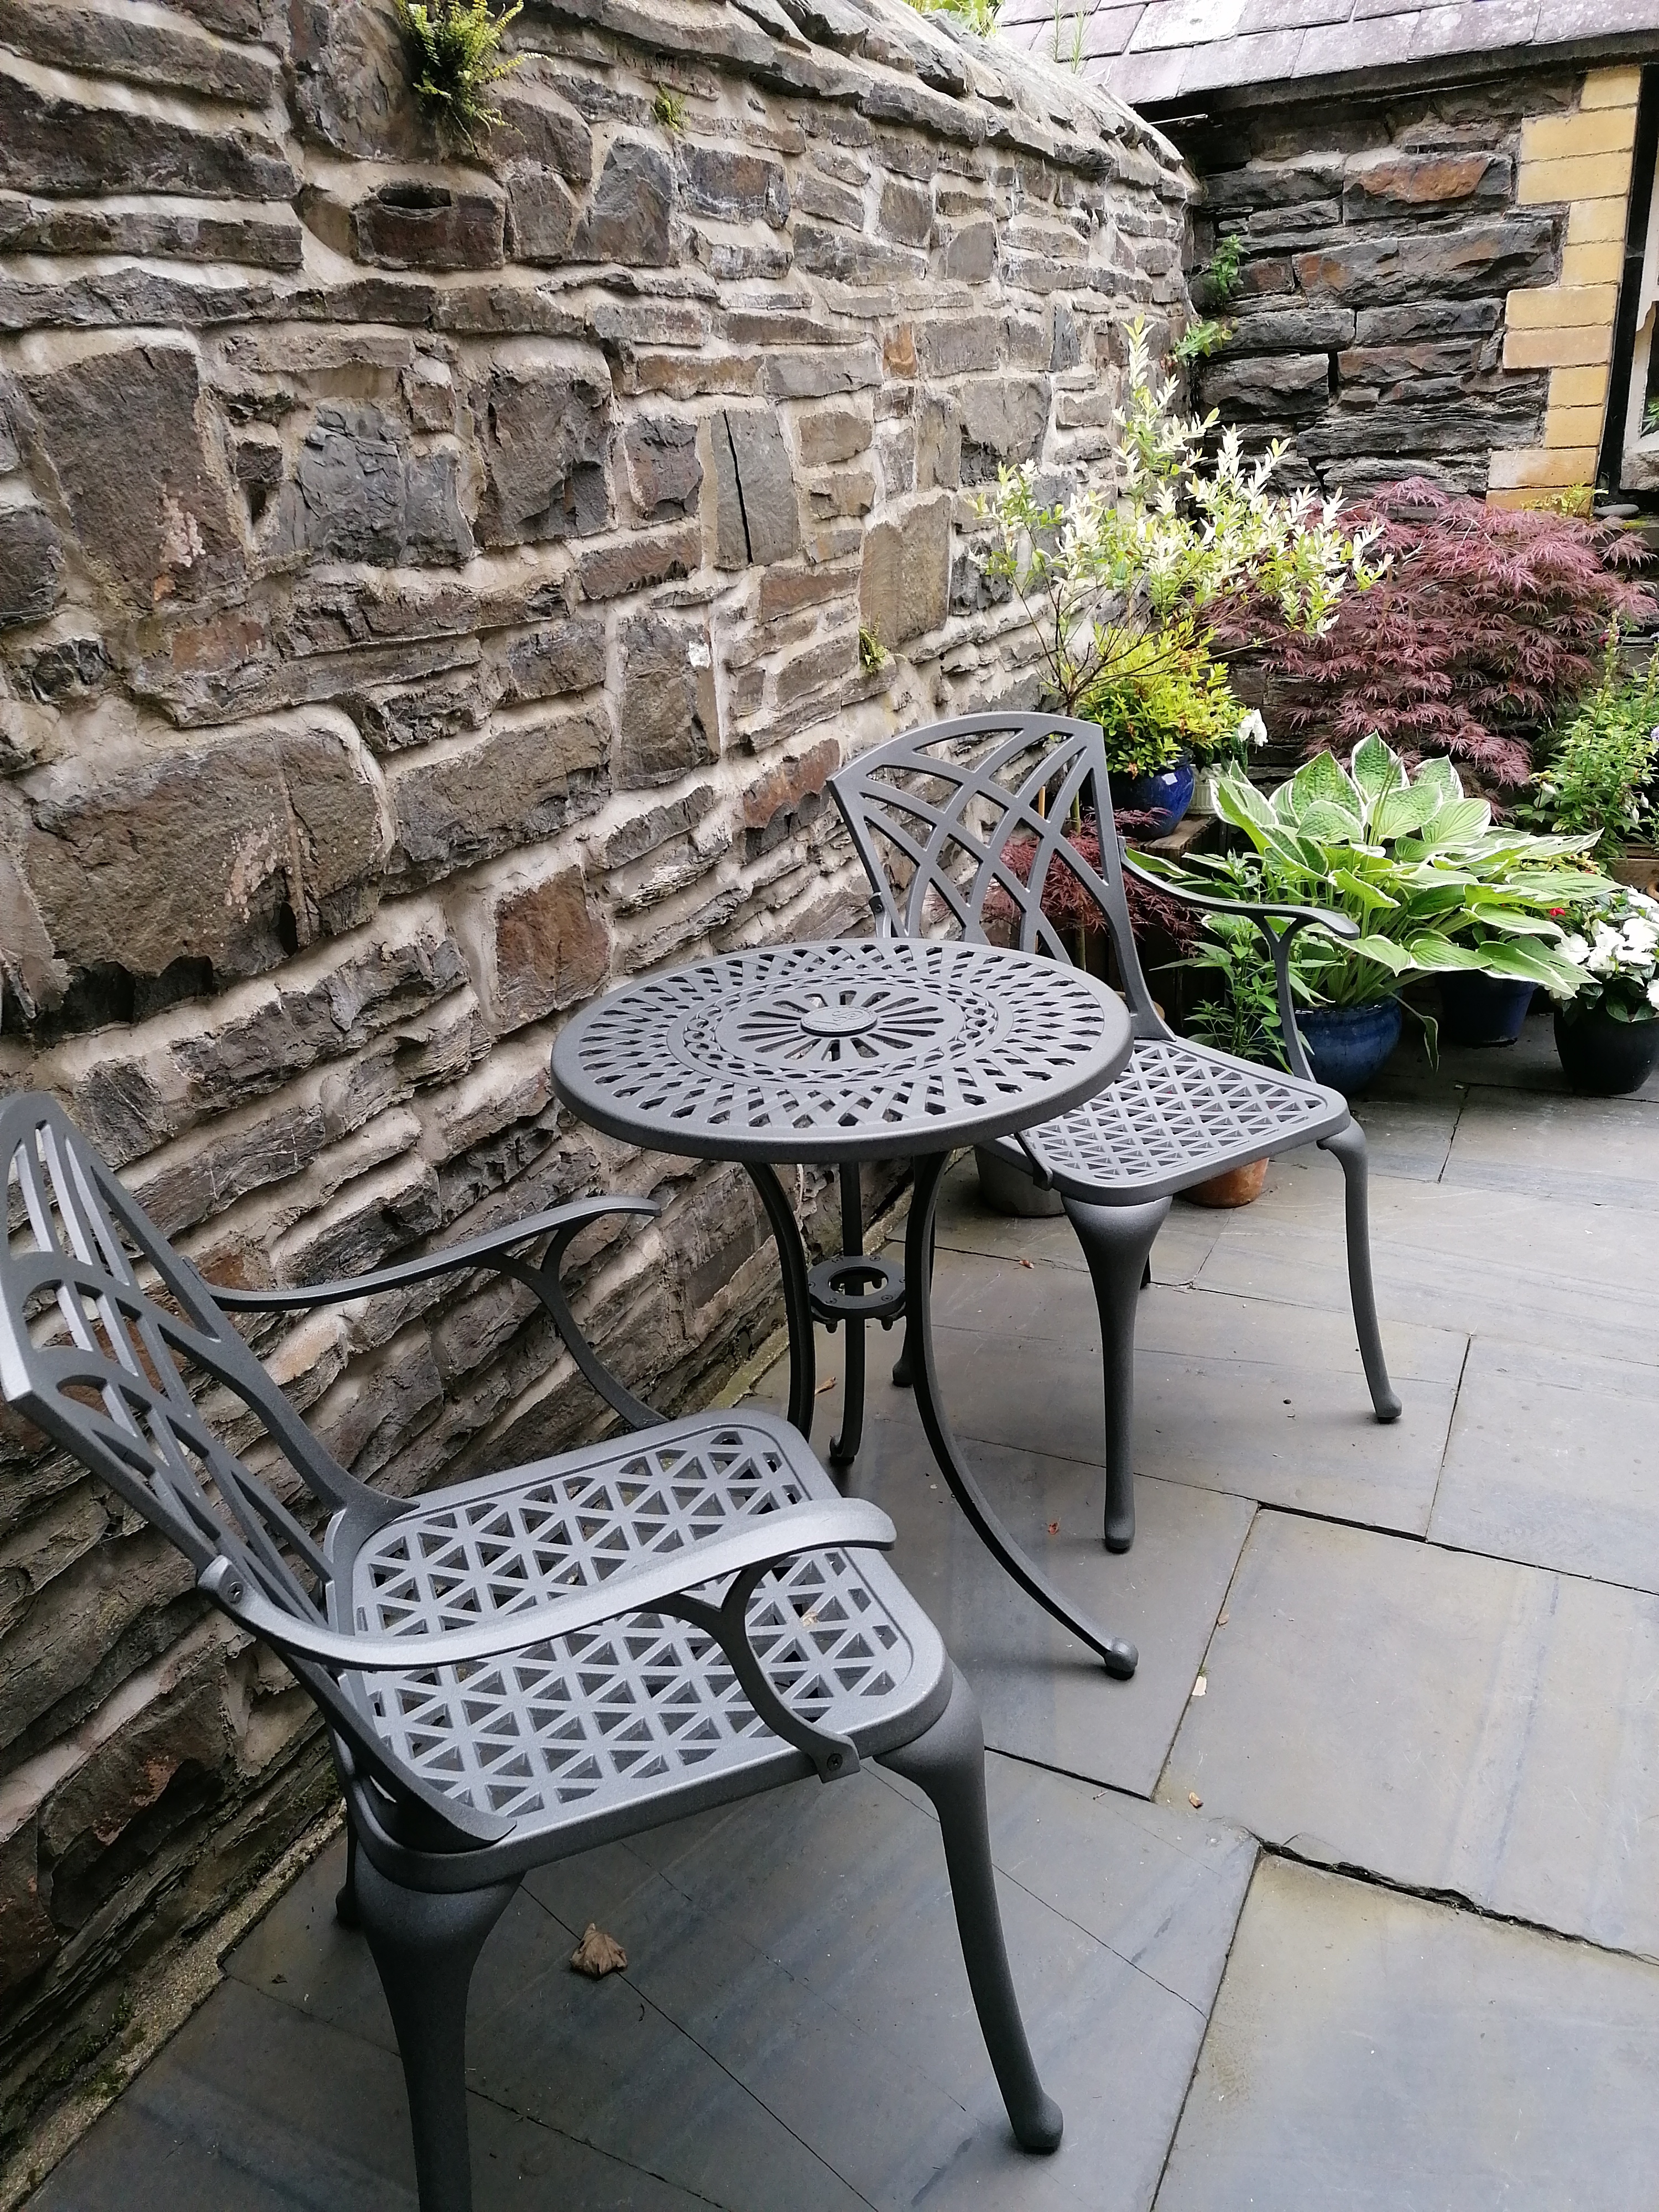 Country or Cottage Garden: Our Garden Furniture looks at home